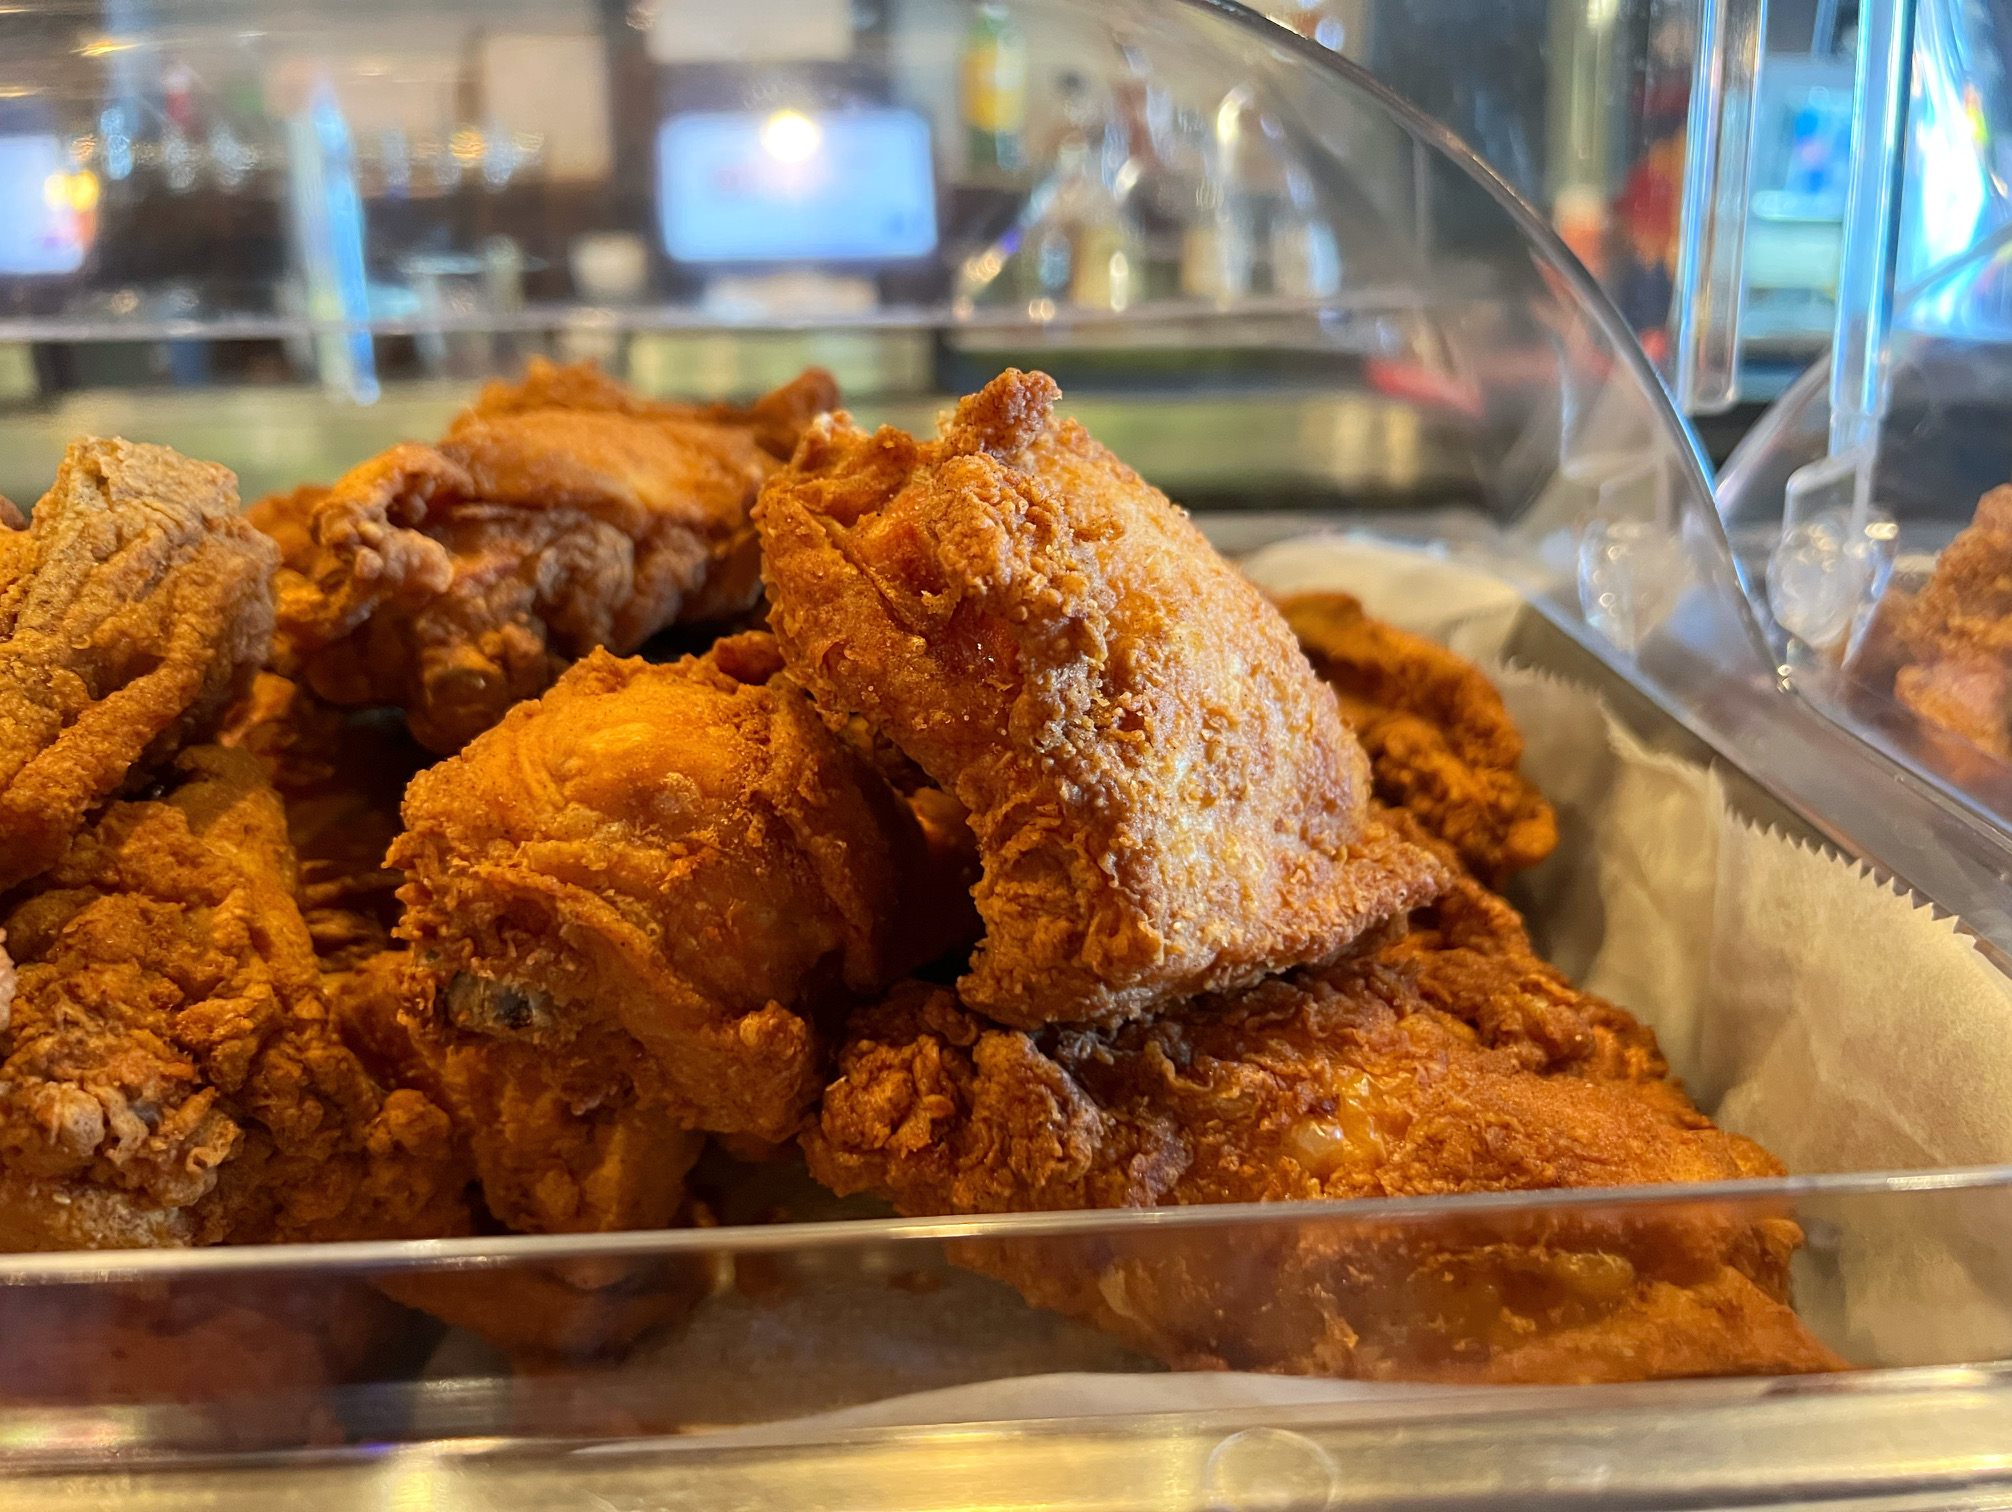 A close up of Neil St. Blues' fried chicken on the Sunday buffet line. Photo by Alyssa Buckley.